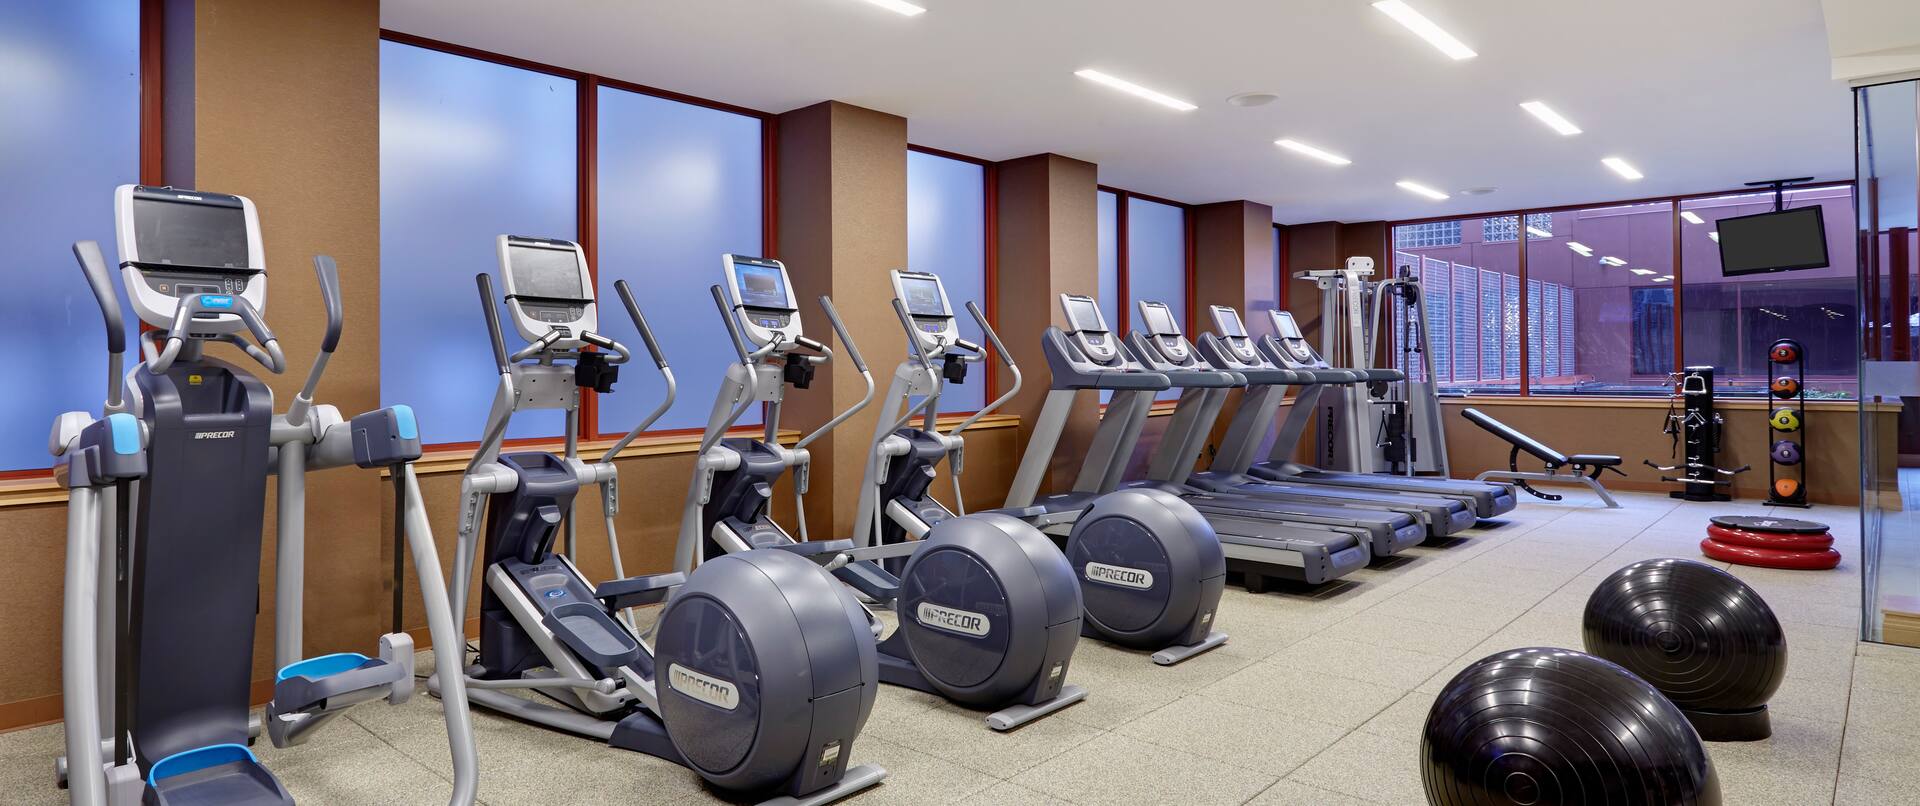 Cardio Equipment, Weight Machine, Bench, TV, Weight Balls, Aerobic Stepper, and Two Exercise Balls in Fitness Center Health Club Area